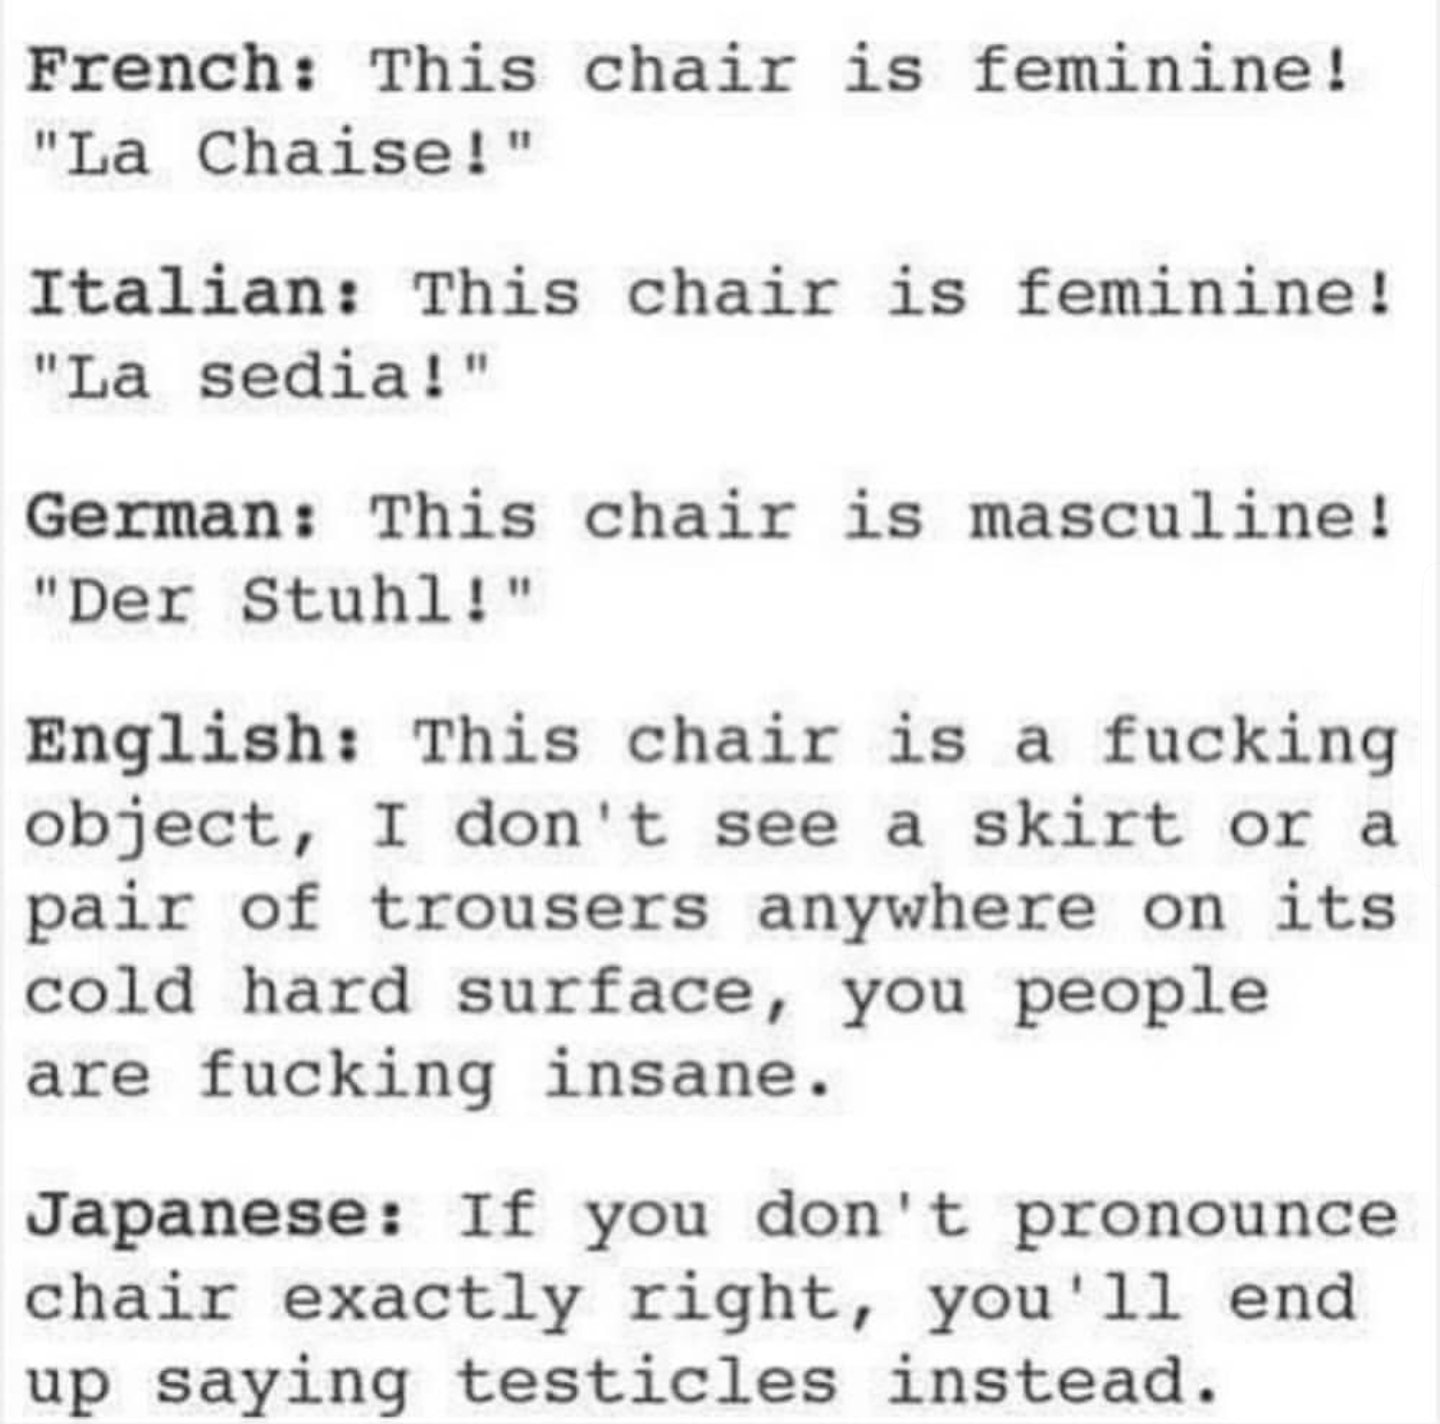 The thing about chairs...